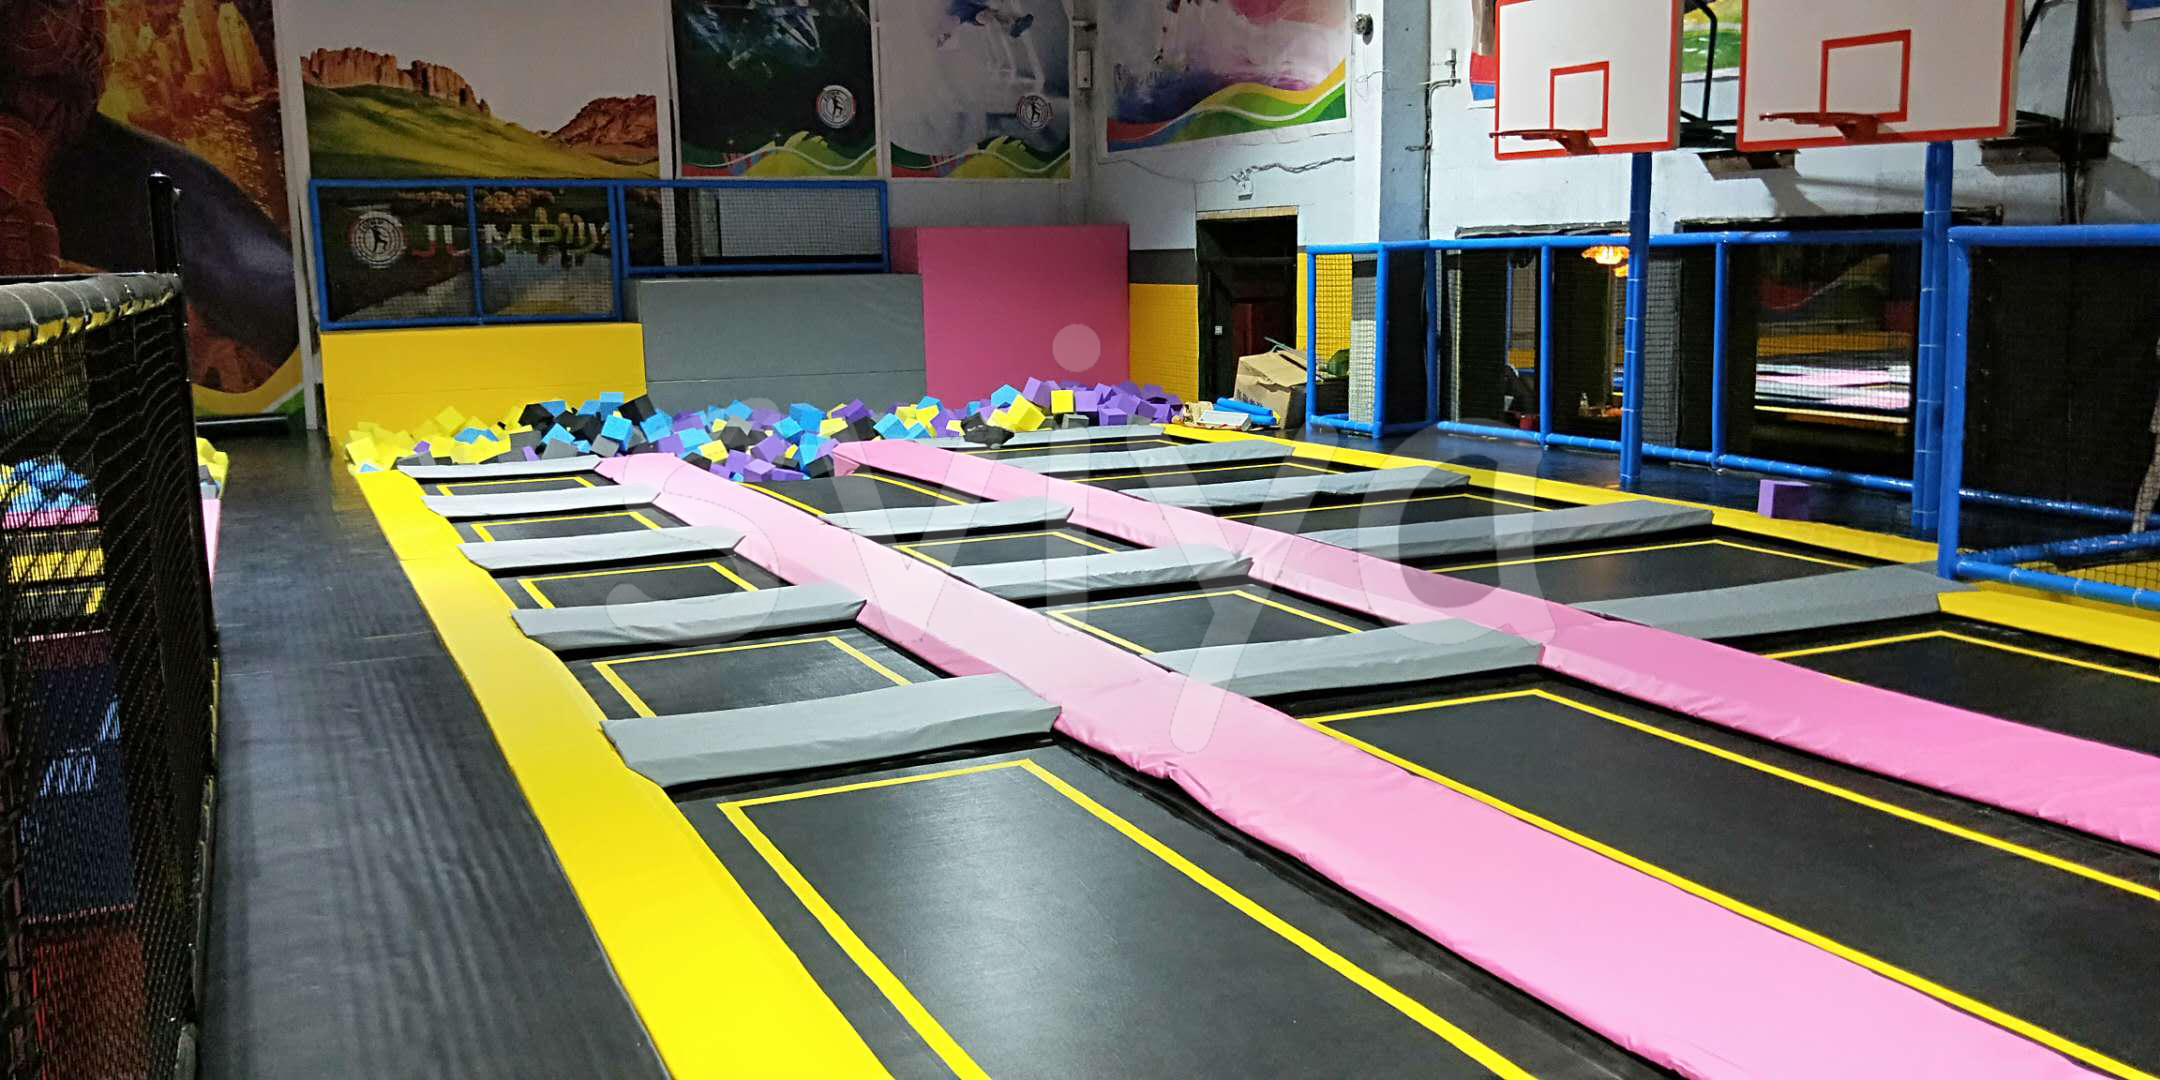 Best China Factory Supply Trampoline Park